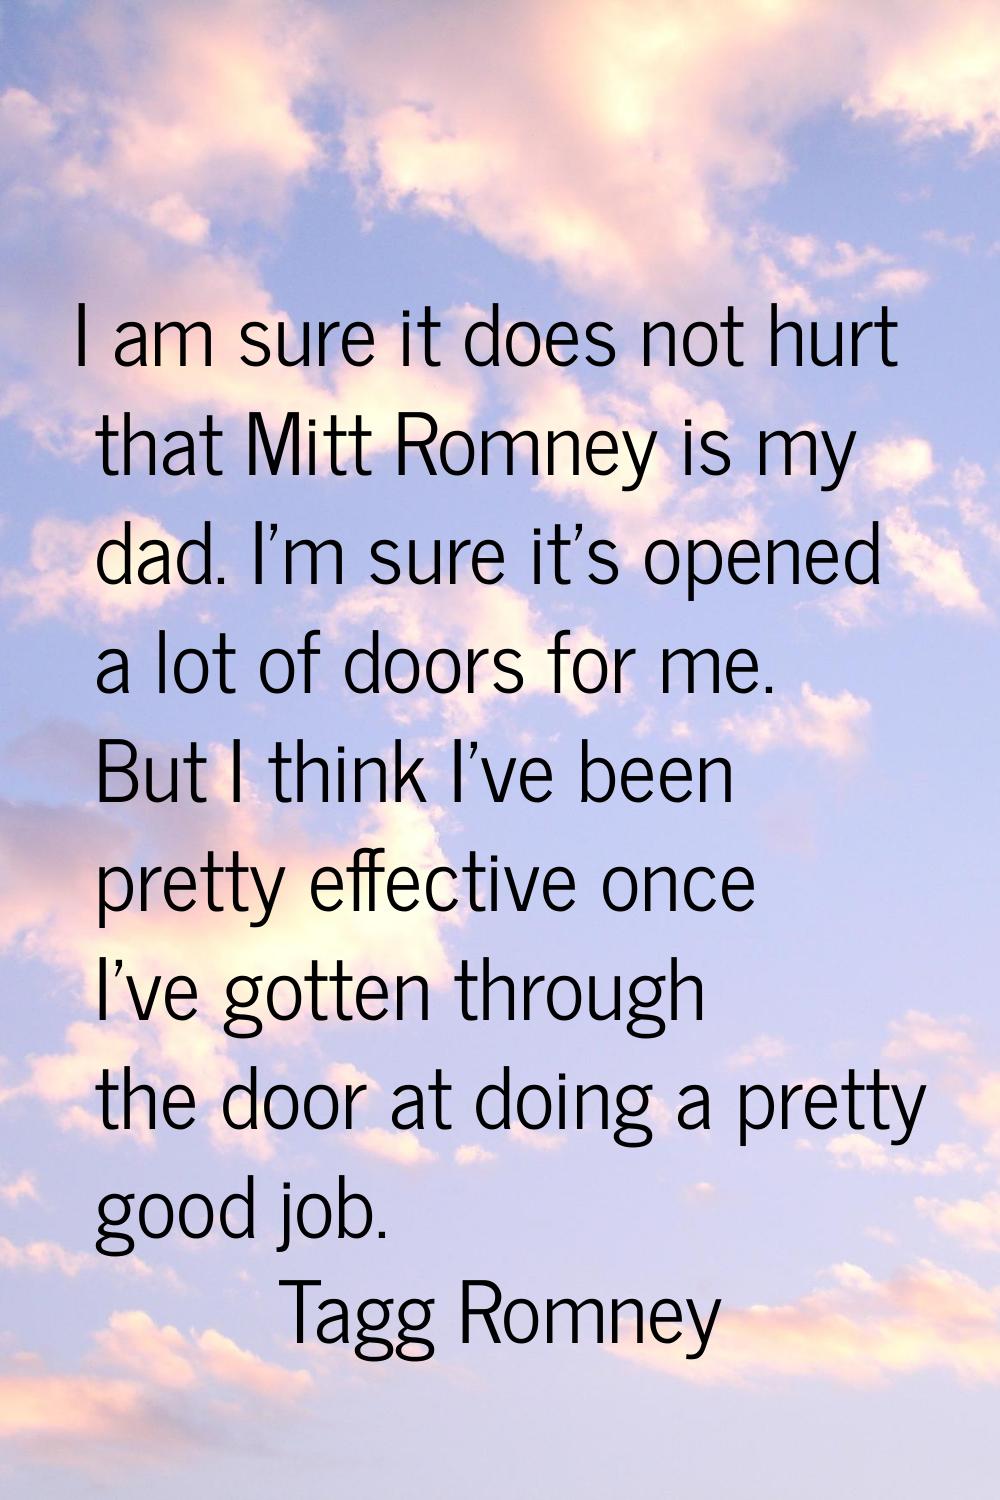 I am sure it does not hurt that Mitt Romney is my dad. I'm sure it's opened a lot of doors for me. 